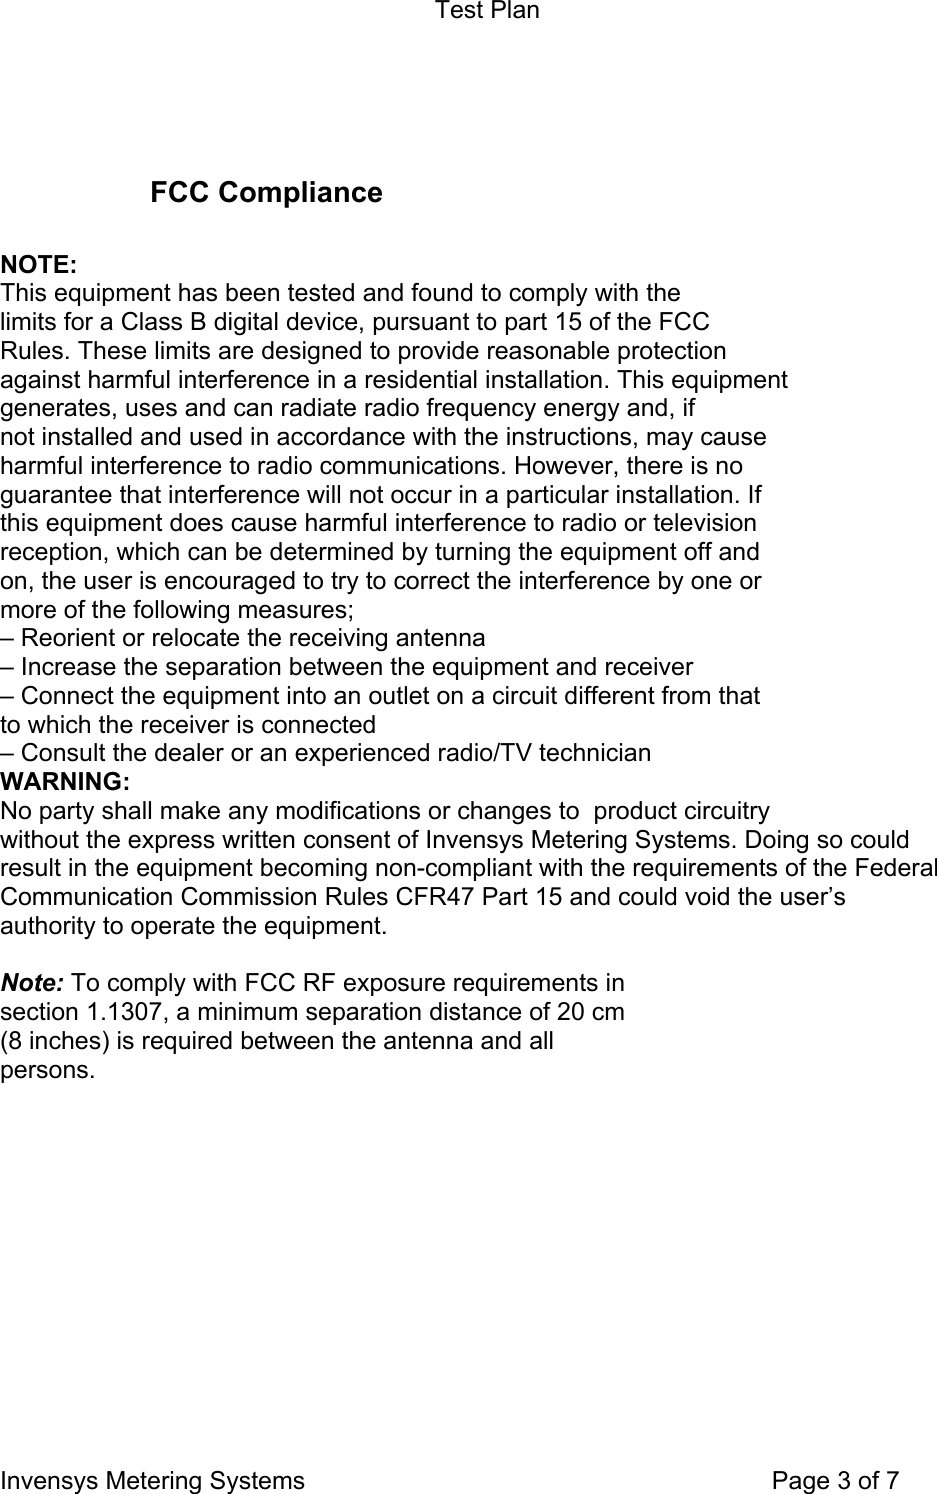 Test Plan Invensys Metering Systems    Page 3 of 7   FCC Compliance   NOTE: This equipment has been tested and found to comply with the limits for a Class B digital device, pursuant to part 15 of the FCC Rules. These limits are designed to provide reasonable protection against harmful interference in a residential installation. This equipment generates, uses and can radiate radio frequency energy and, if not installed and used in accordance with the instructions, may cause harmful interference to radio communications. However, there is no guarantee that interference will not occur in a particular installation. If this equipment does cause harmful interference to radio or television reception, which can be determined by turning the equipment off and on, the user is encouraged to try to correct the interference by one or more of the following measures; – Reorient or relocate the receiving antenna – Increase the separation between the equipment and receiver – Connect the equipment into an outlet on a circuit different from that to which the receiver is connected – Consult the dealer or an experienced radio/TV technician WARNING: No party shall make any modifications or changes to  product circuitry  without the express written consent of Invensys Metering Systems. Doing so could result in the equipment becoming non-compliant with the requirements of the Federal Communication Commission Rules CFR47 Part 15 and could void the user’s authority to operate the equipment.  Note: To comply with FCC RF exposure requirements in section 1.1307, a minimum separation distance of 20 cm (8 inches) is required between the antenna and all persons.    